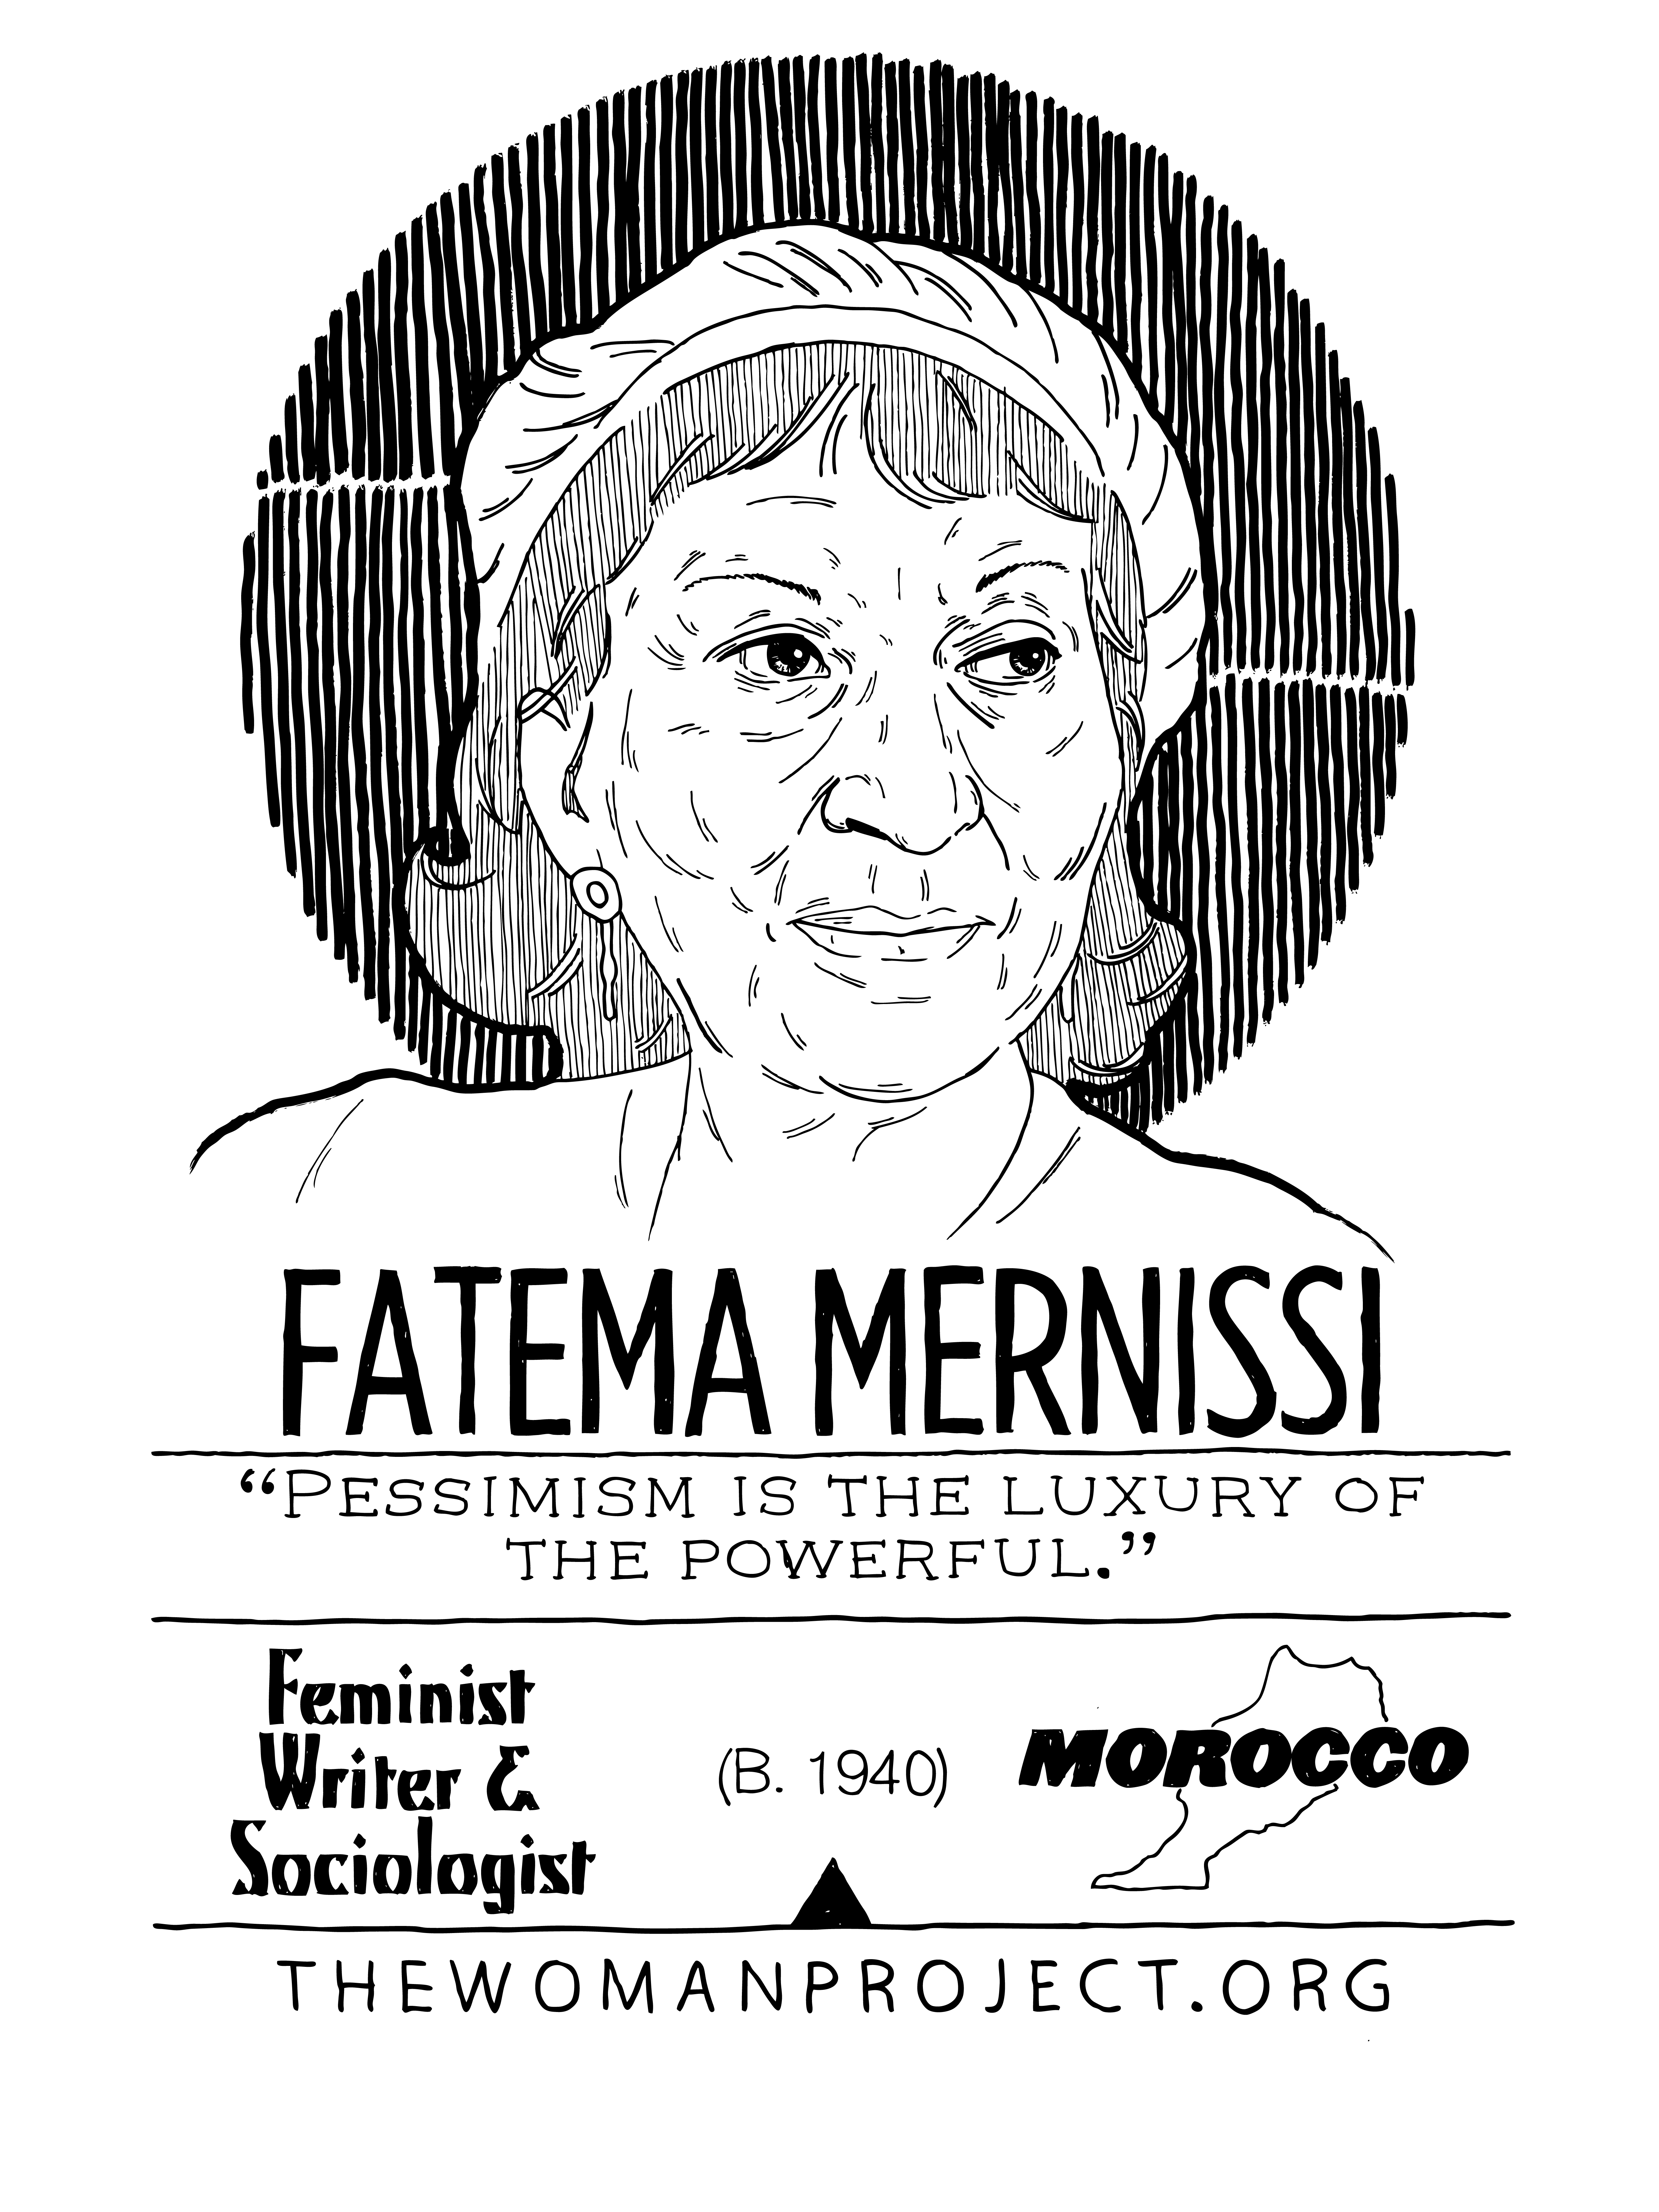 Poster of Fate Mernissi who was a Moroccan feminist writer and sociologist.